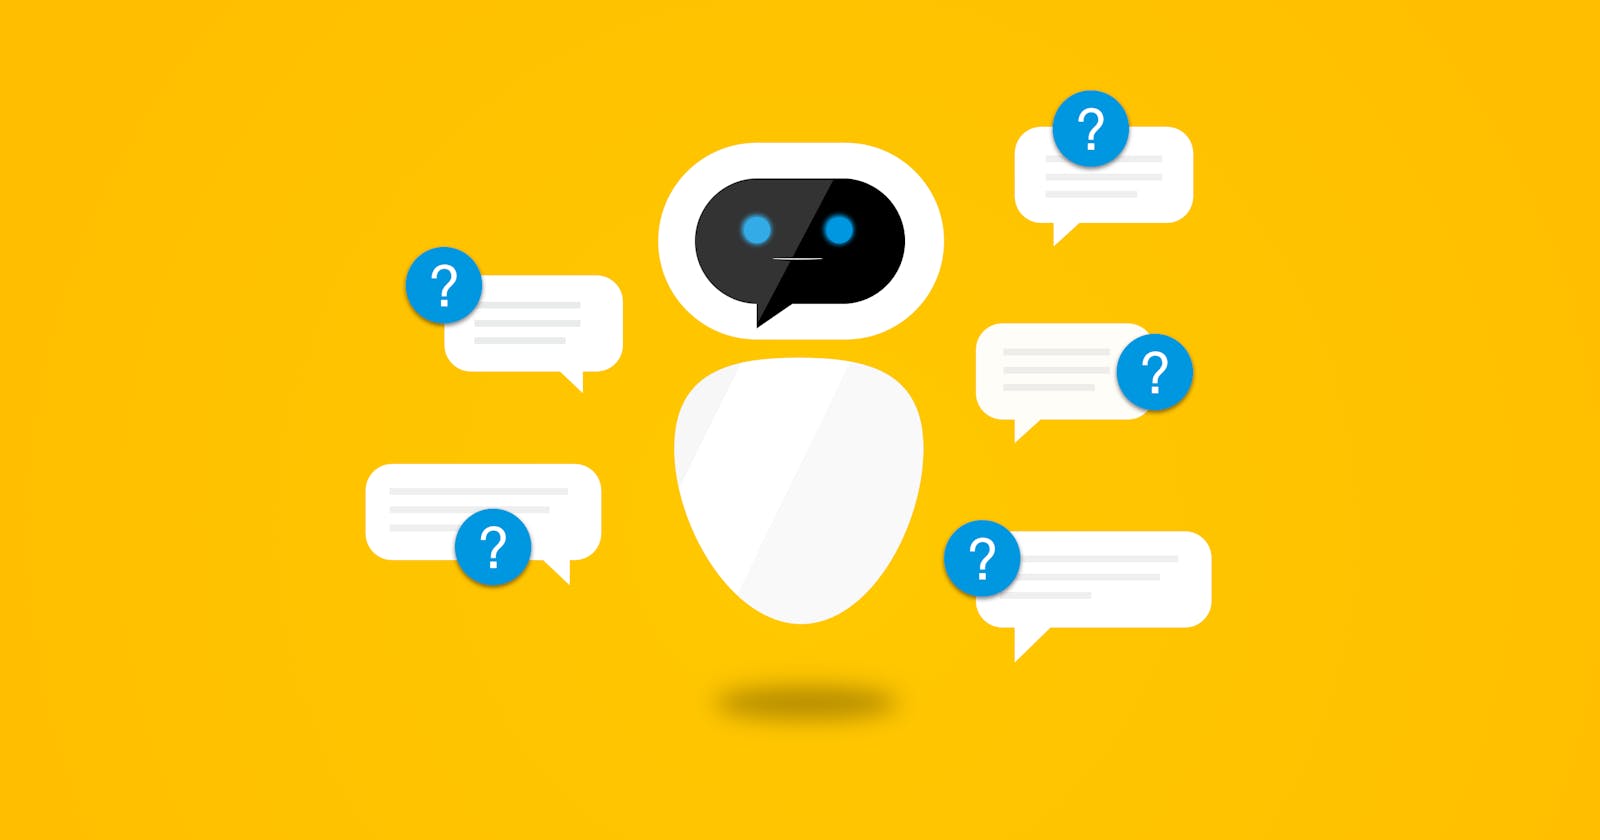 How to make a simple CHAT-BOT using Tensorflow